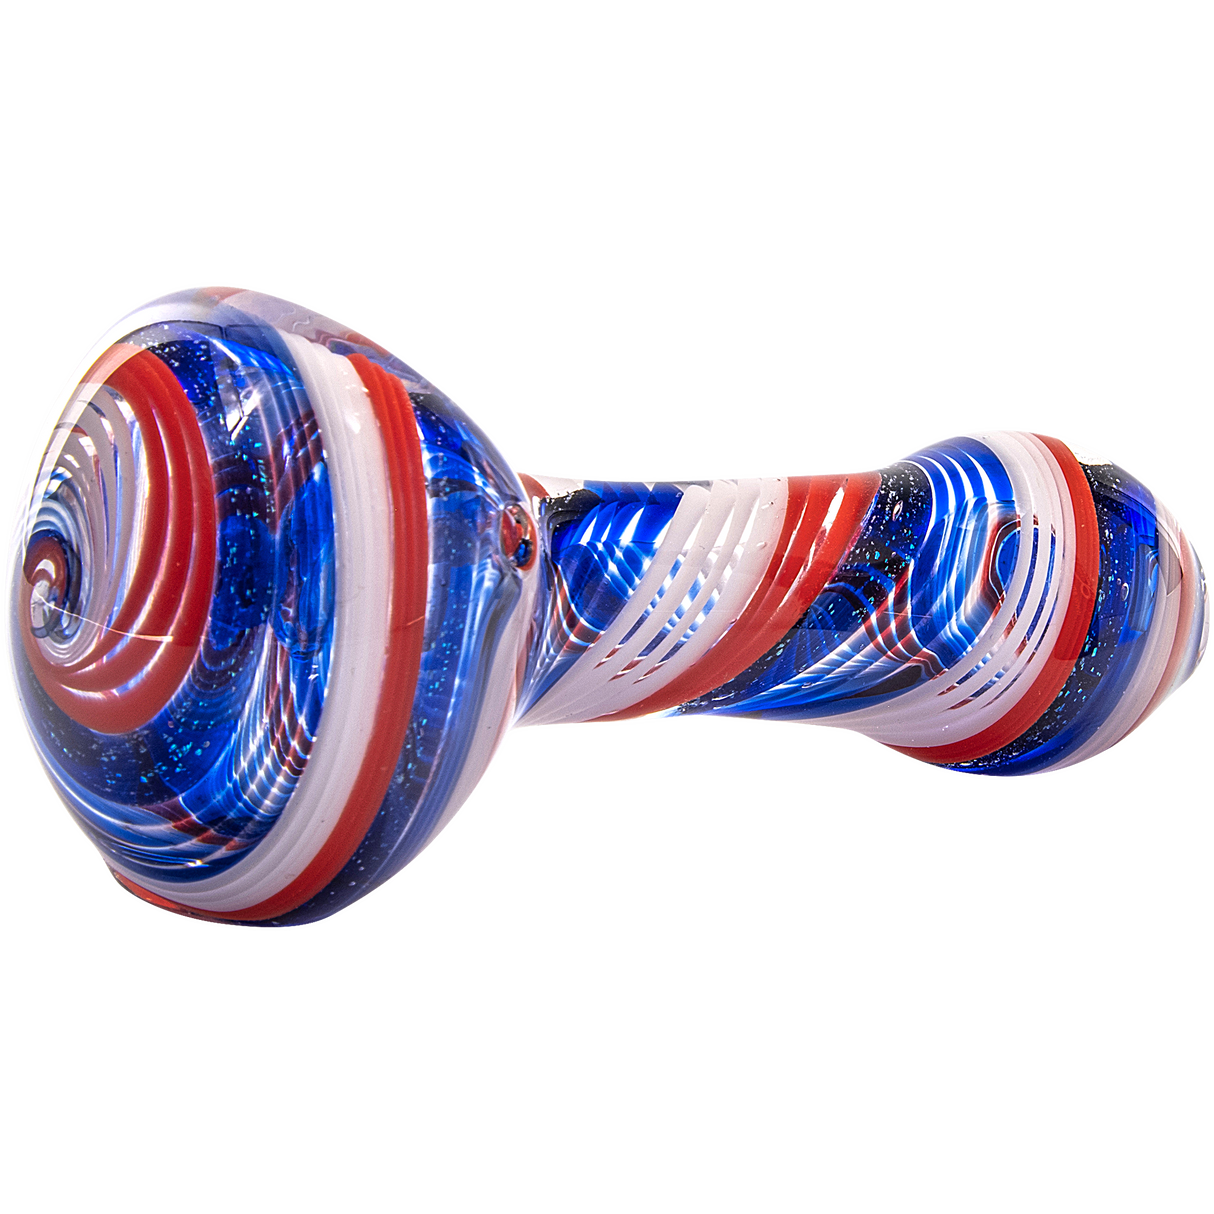 LA Pipes Stars and Stripes Glass Spoon Pipe, Compact Borosilicate, Side View